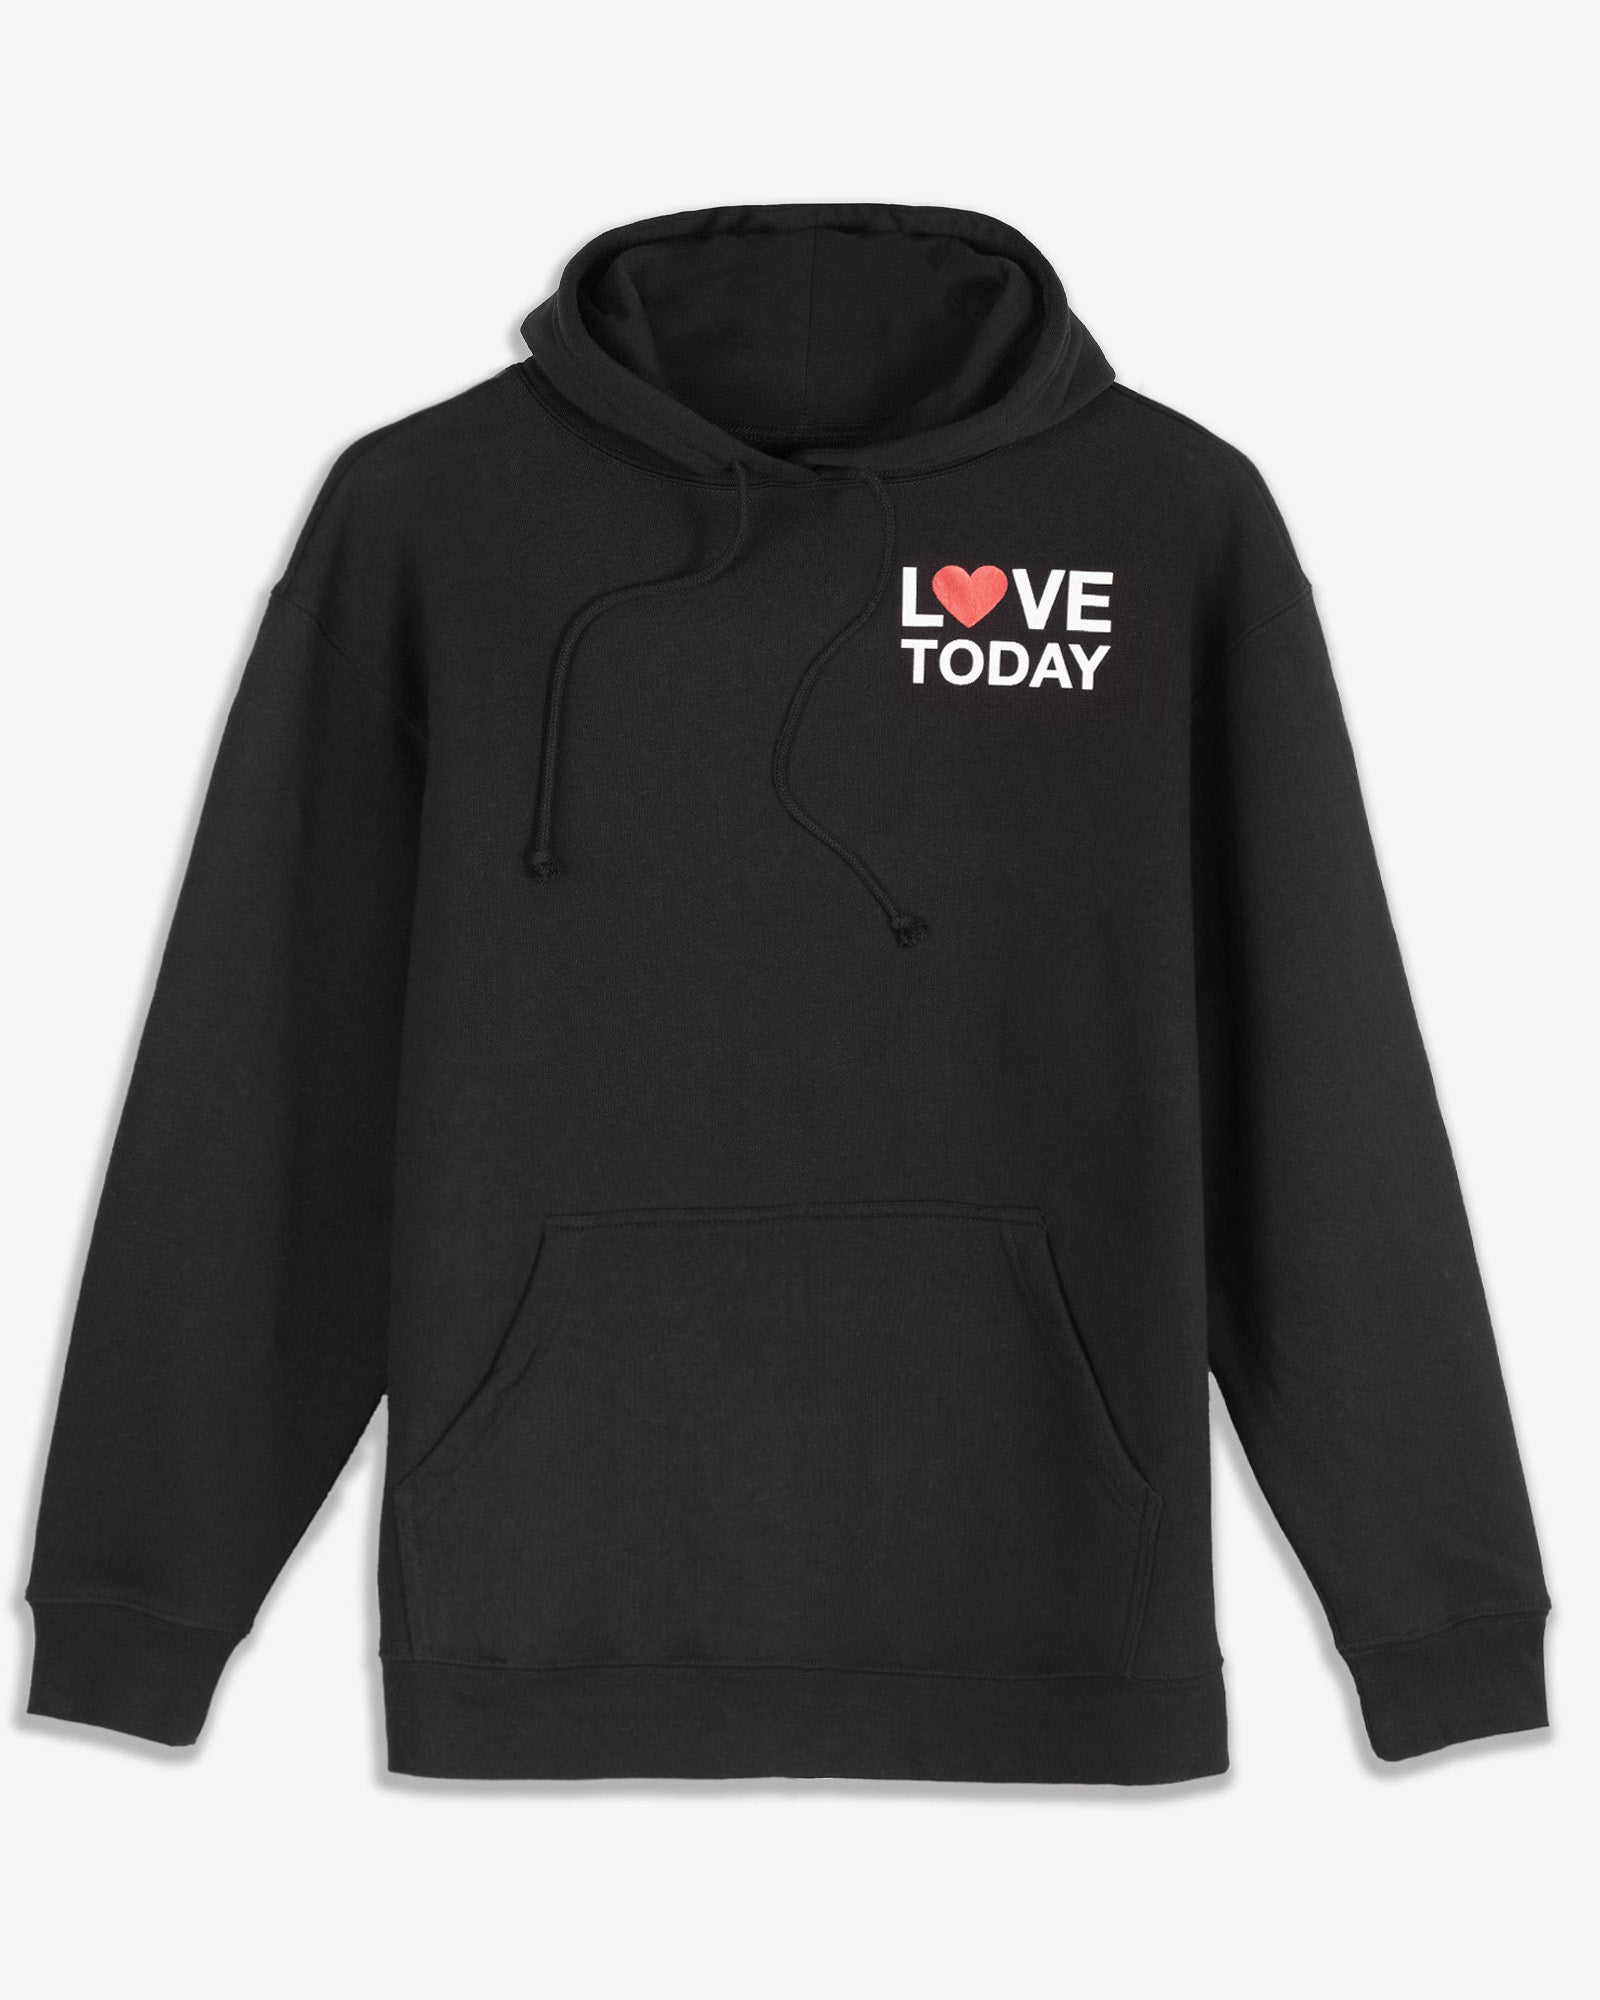 TODAY Love Today Hoodie